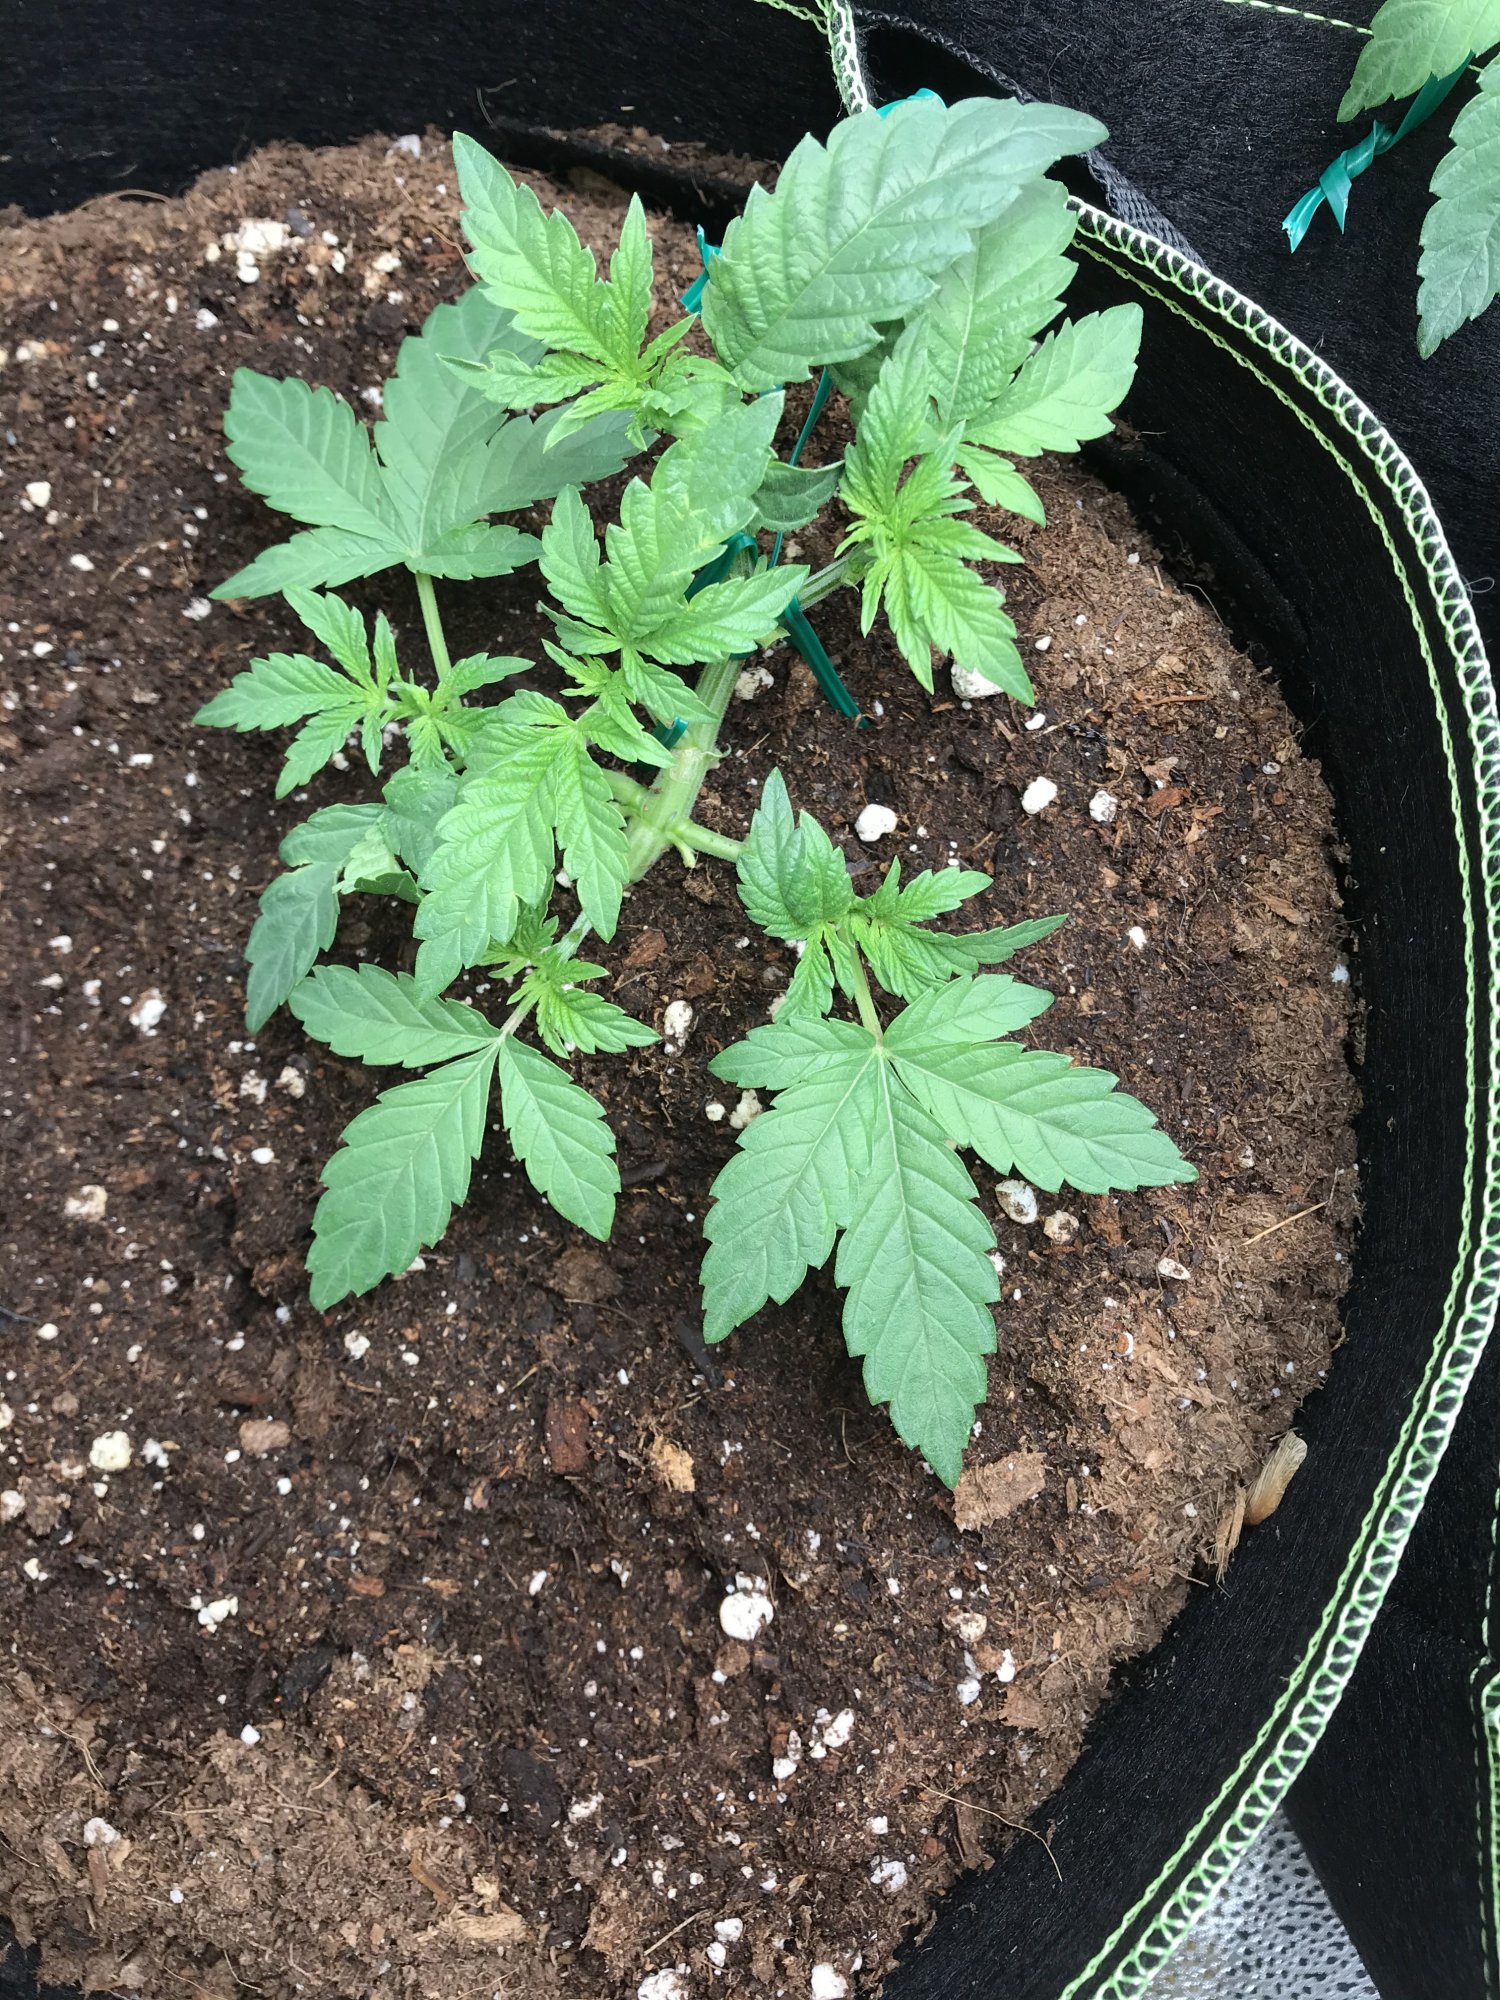 New to this forum and indoor growing any help would be much appreciated pictures in thread 3